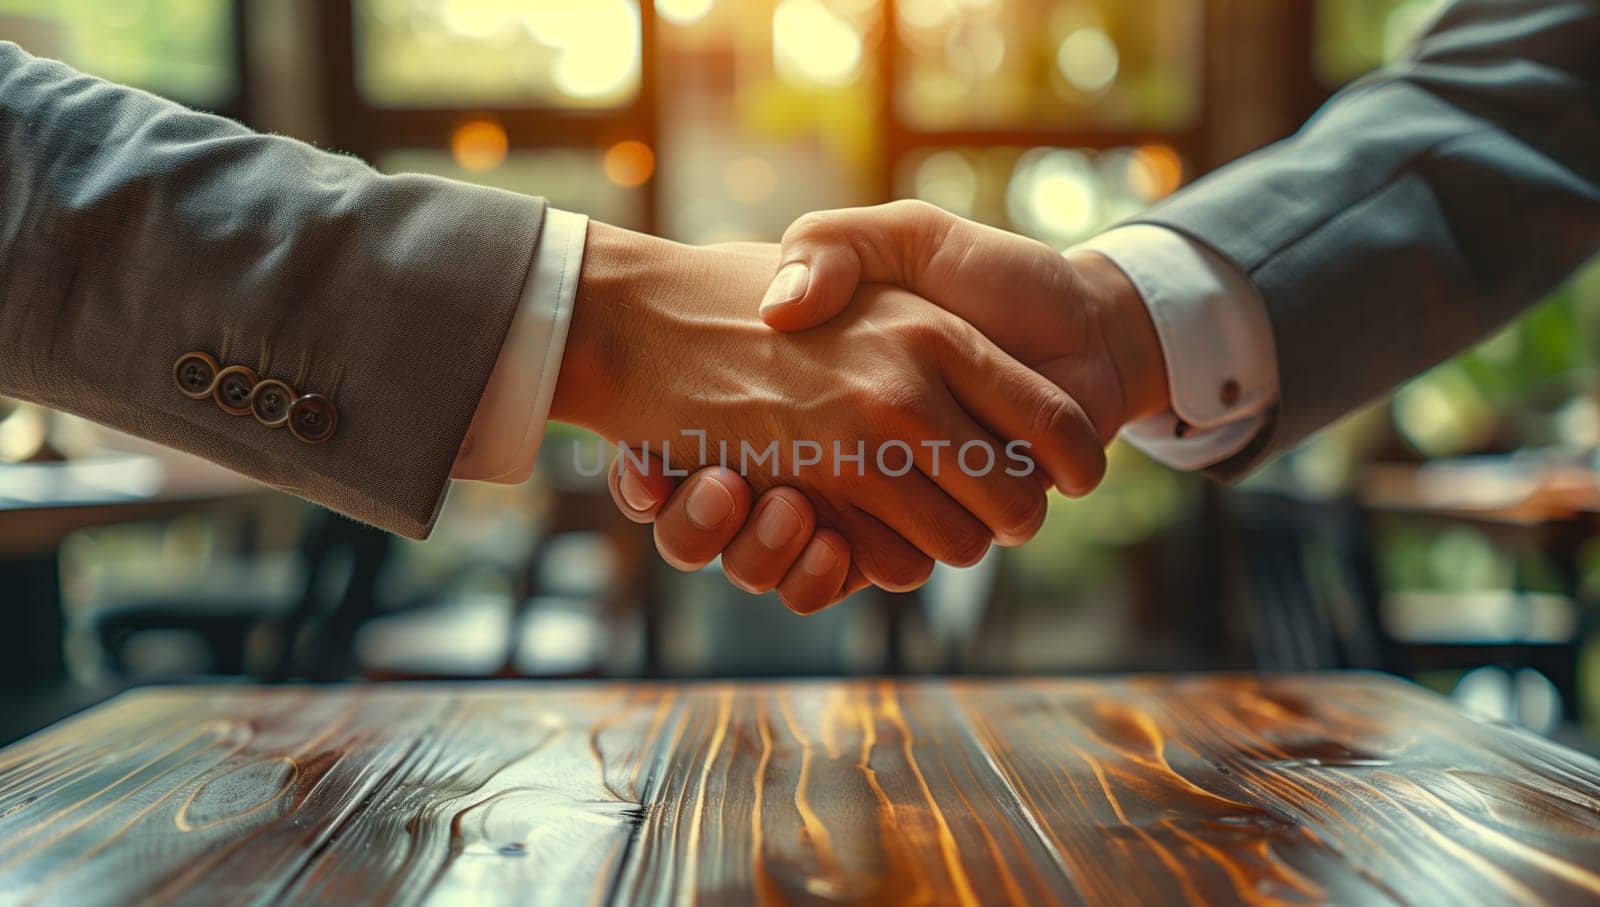 Two men performing a handshake gesture on a wooden table by richwolf